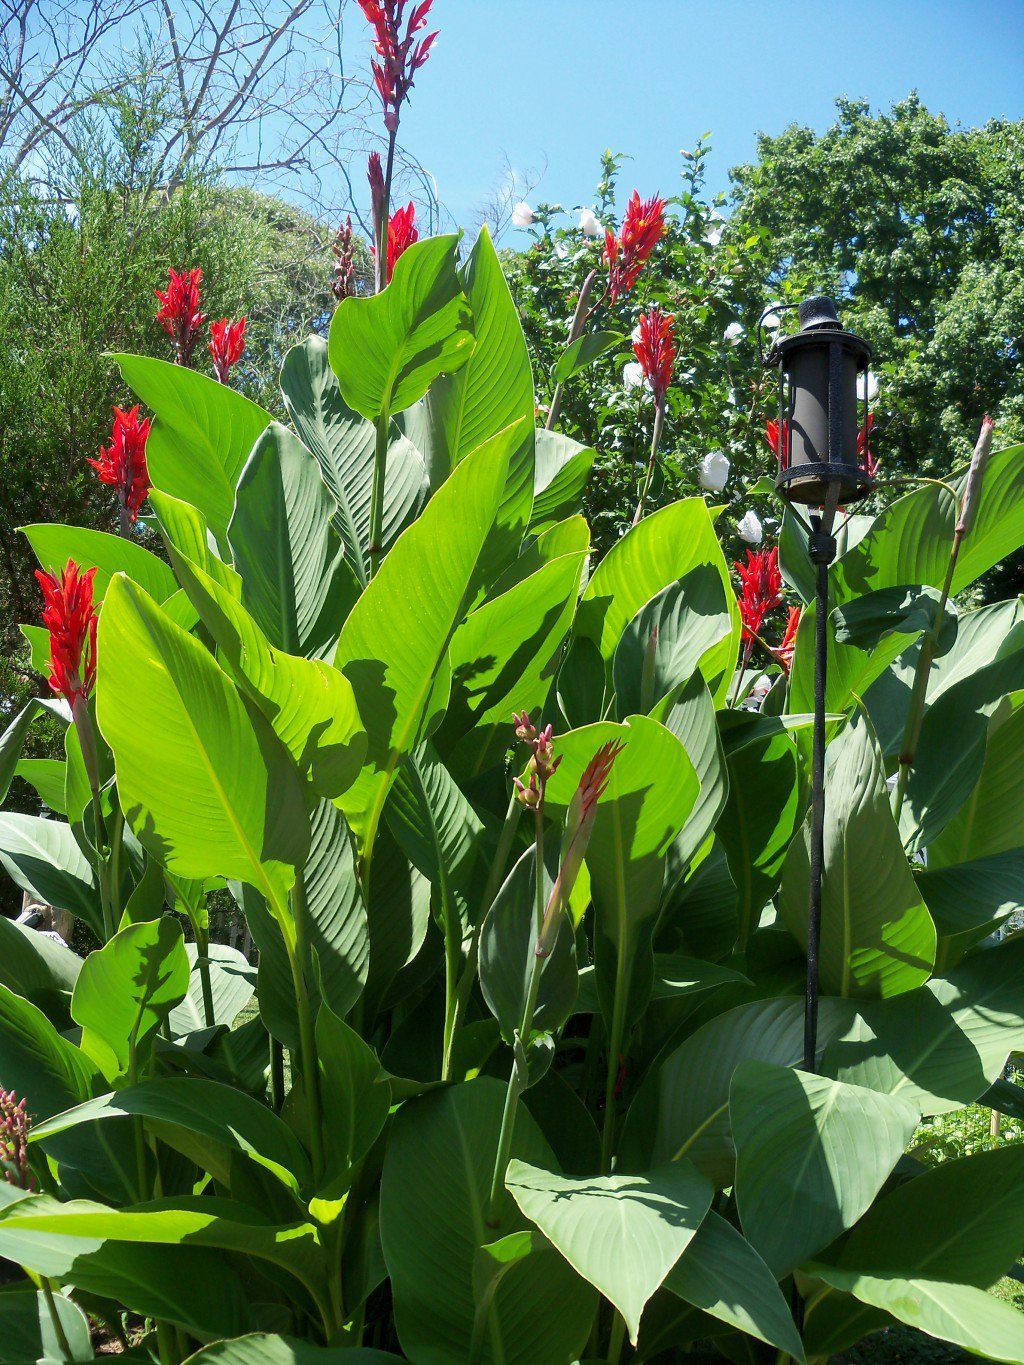 How to Attract Hummingbirds in Your Yard by Planting Canna Lily Lilies in Your Garden -   17 plants Tropical canna lily ideas